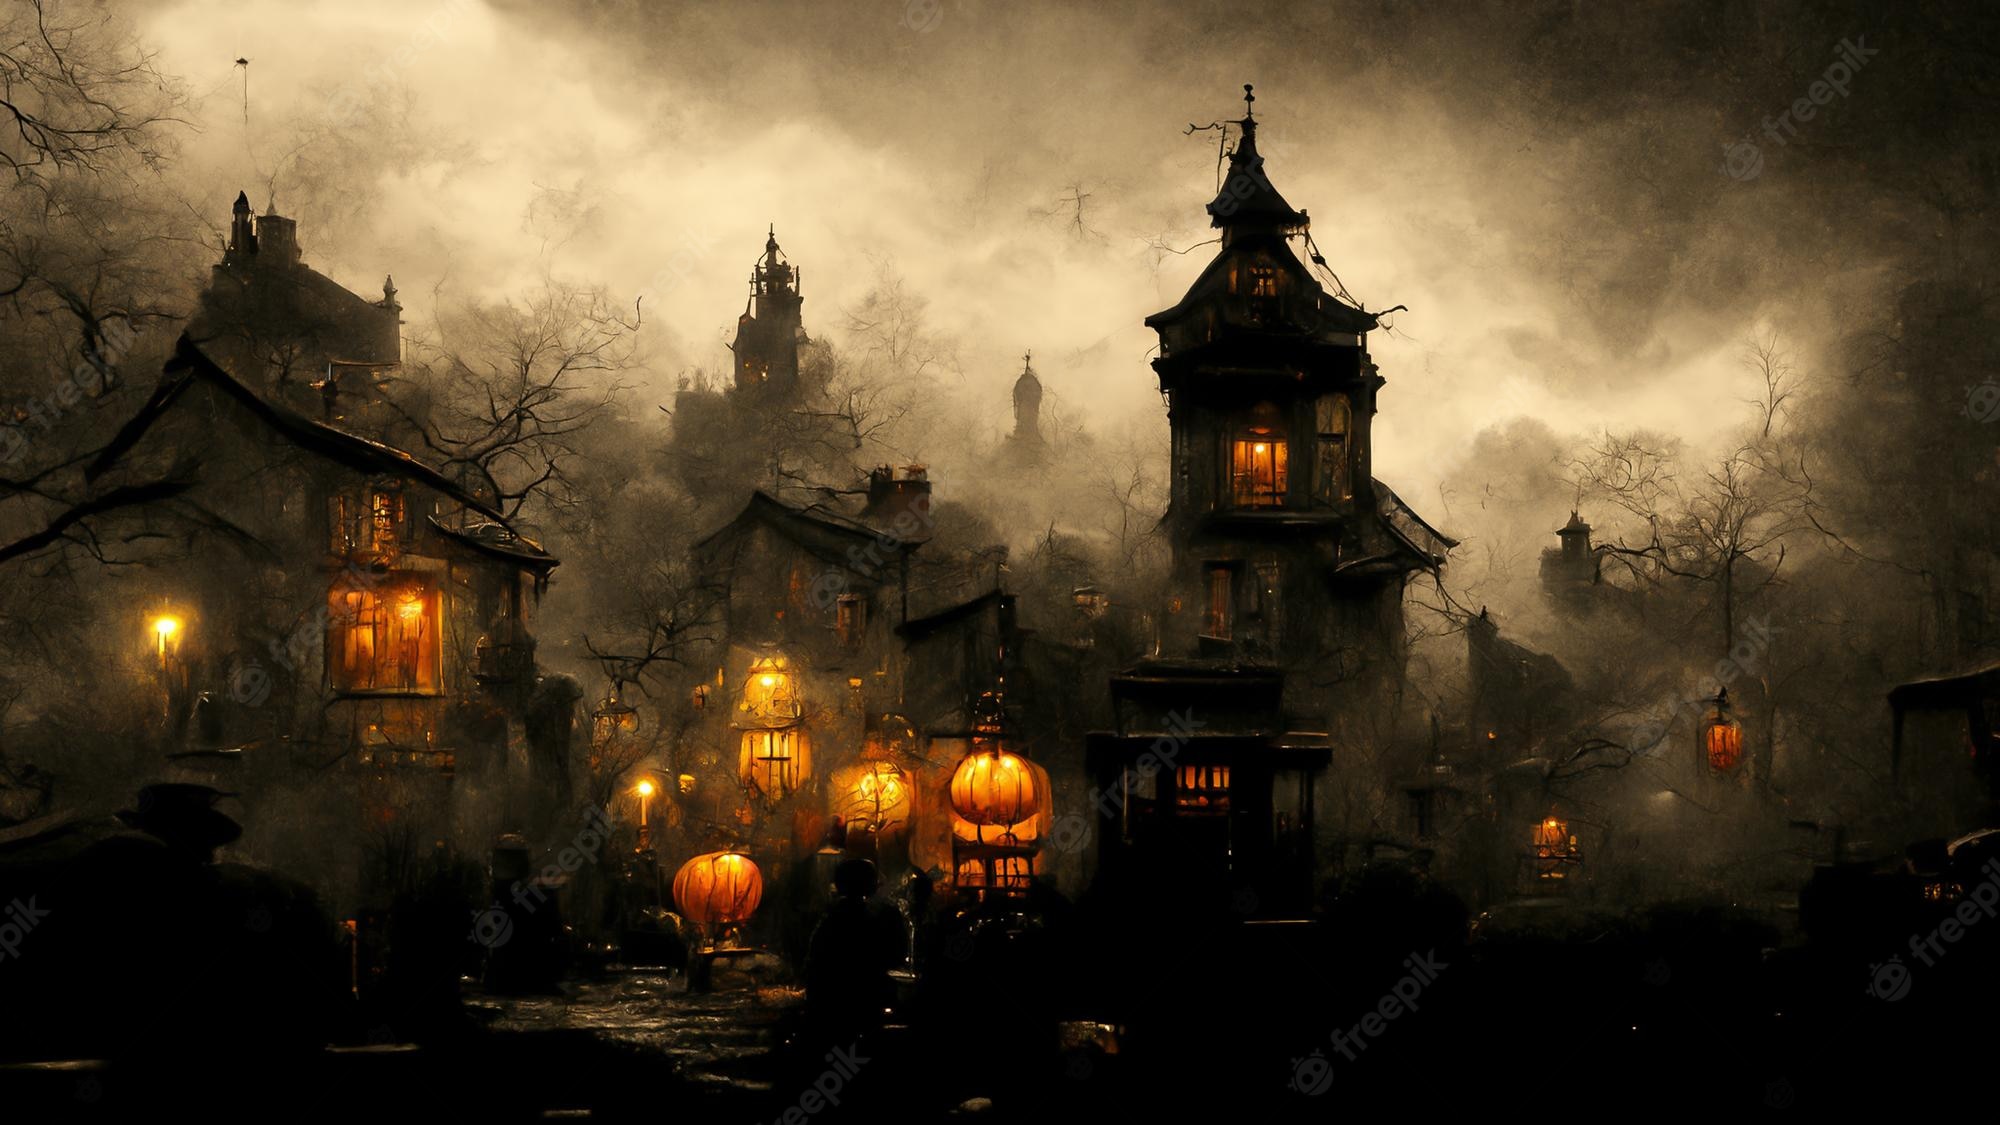 Premium Photod illustration of a halloween concept dark background of a castle and graveyard horror background